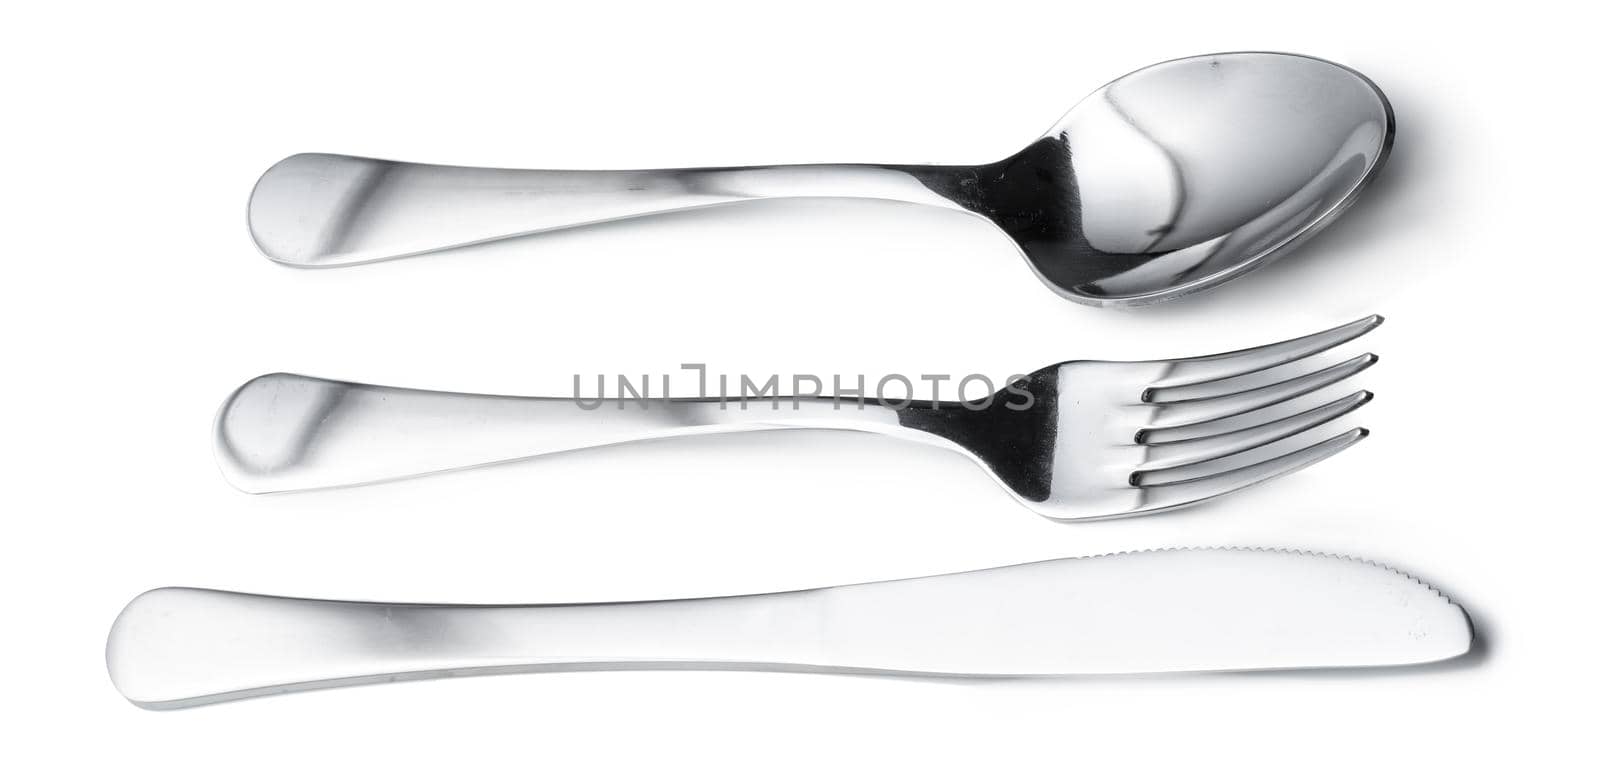 Spoon, knife and fork isolated on white background. Close up.